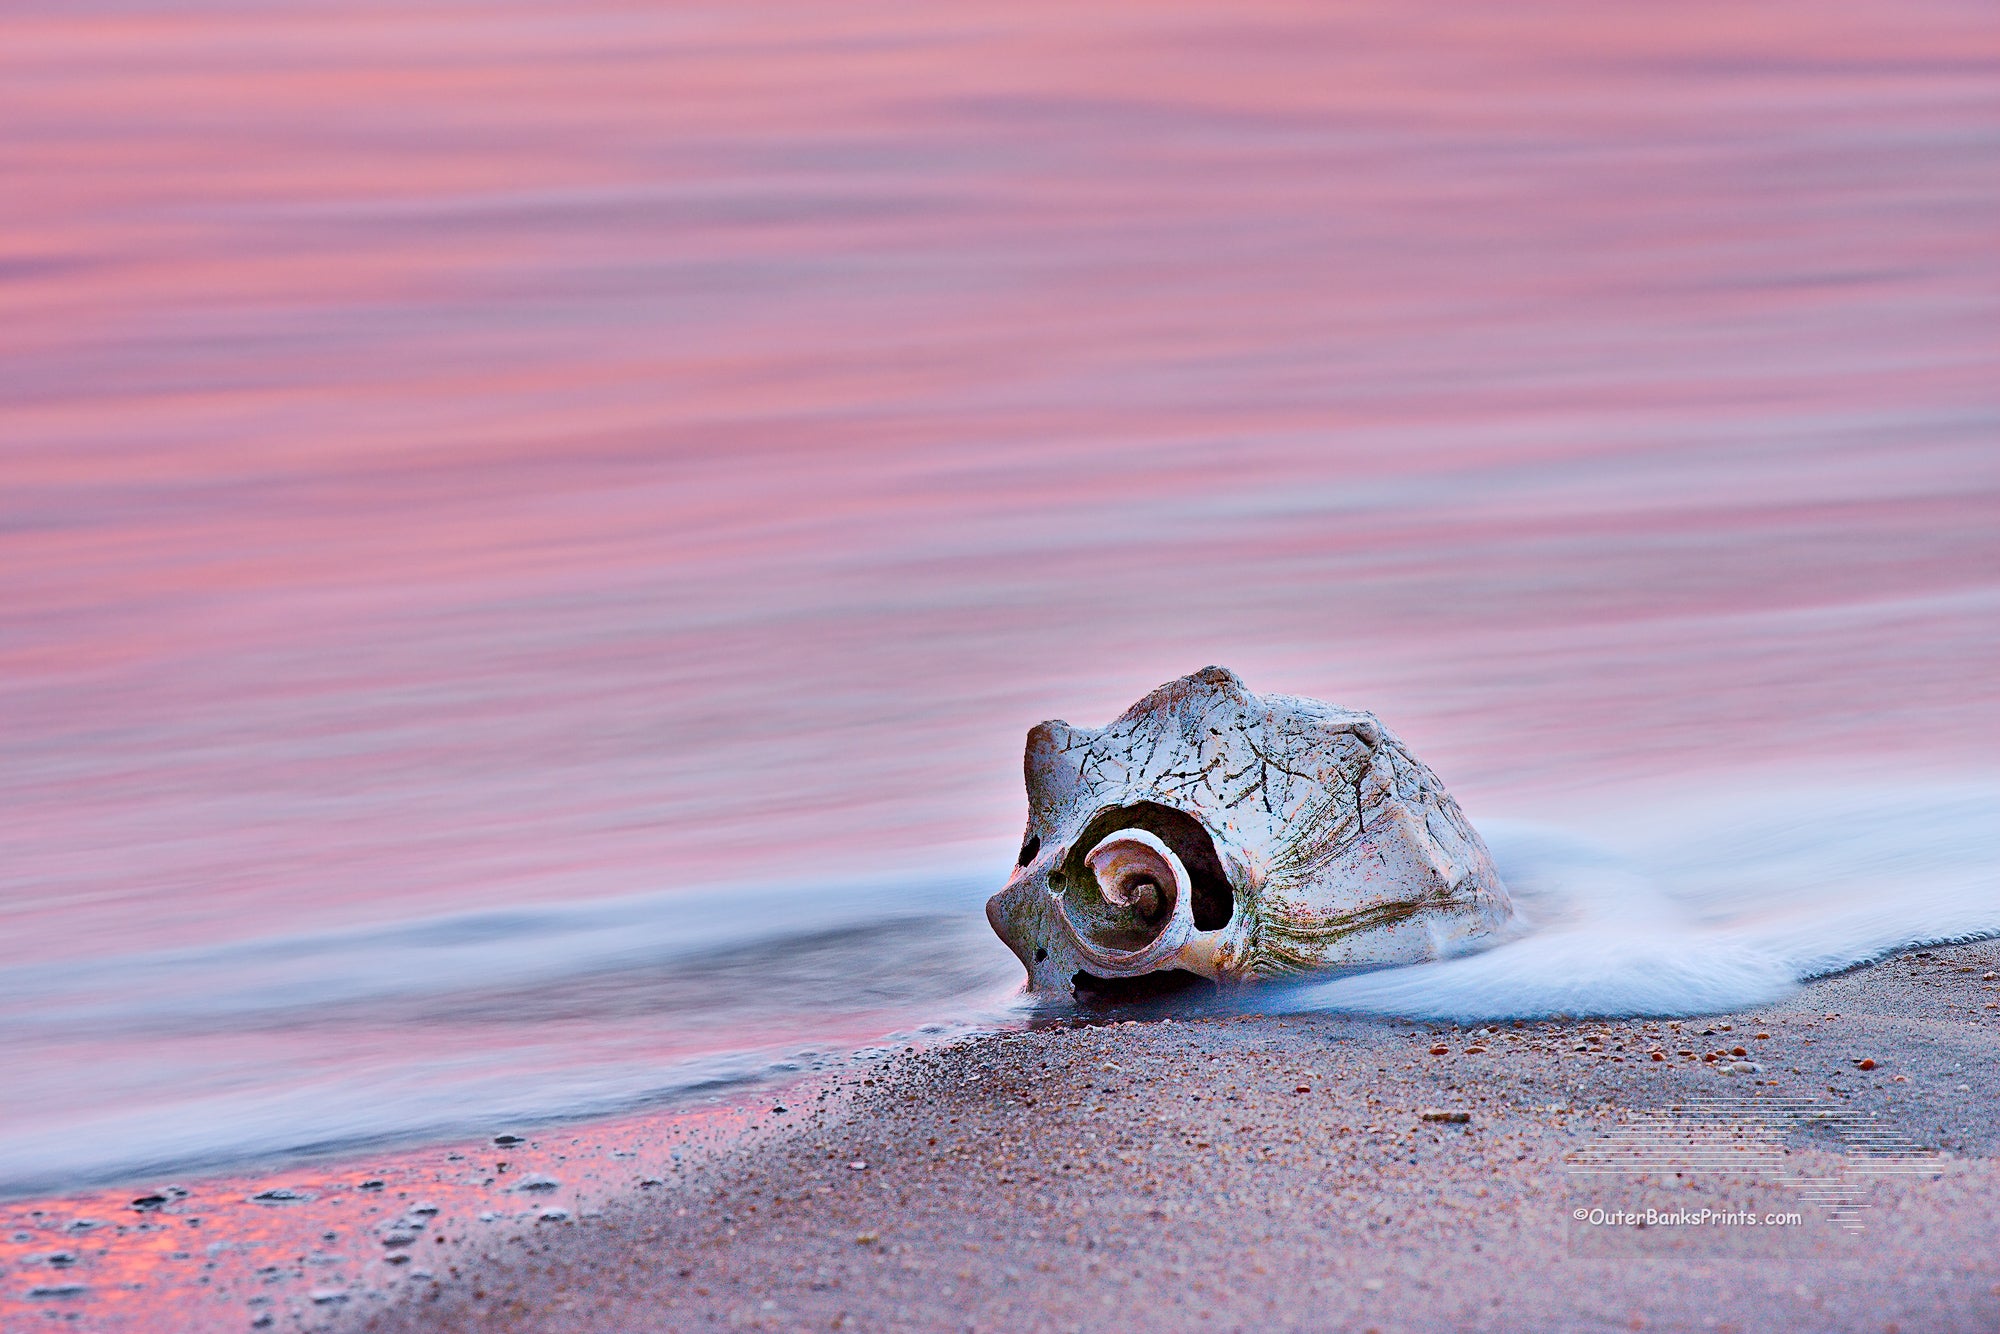 A whelk shell at sunrise on Kitty Hawk beach. The long exposure blurred the motion of the waves into a sea of pink color reflected from the sunrise.